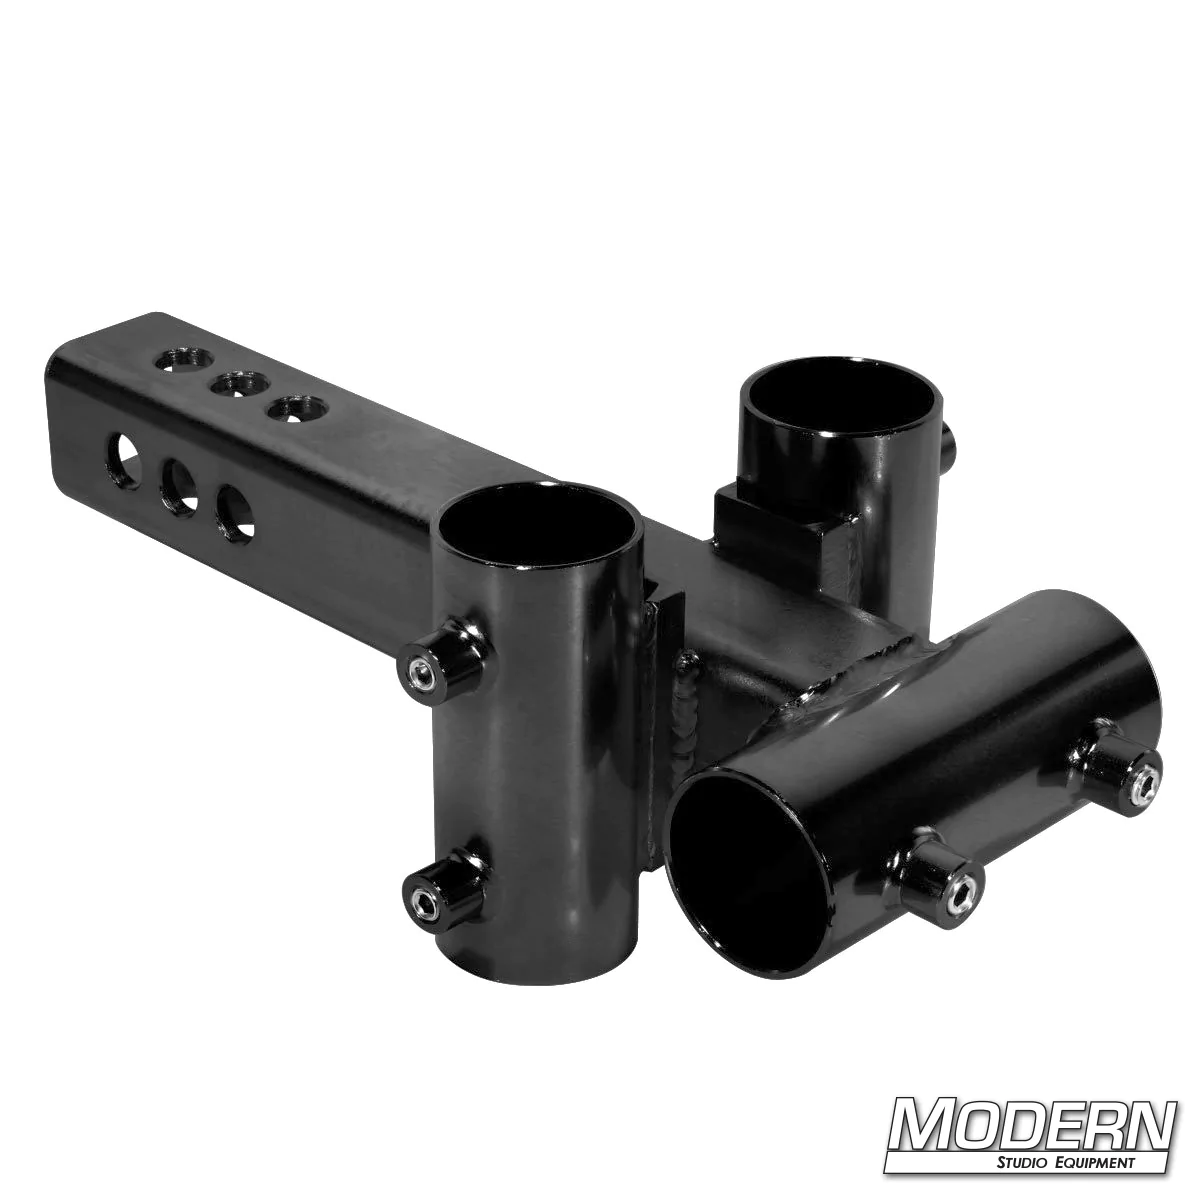 Small Trailer Hitch Adapter for 1-1/2" Speed-Rail® - Black Zinc